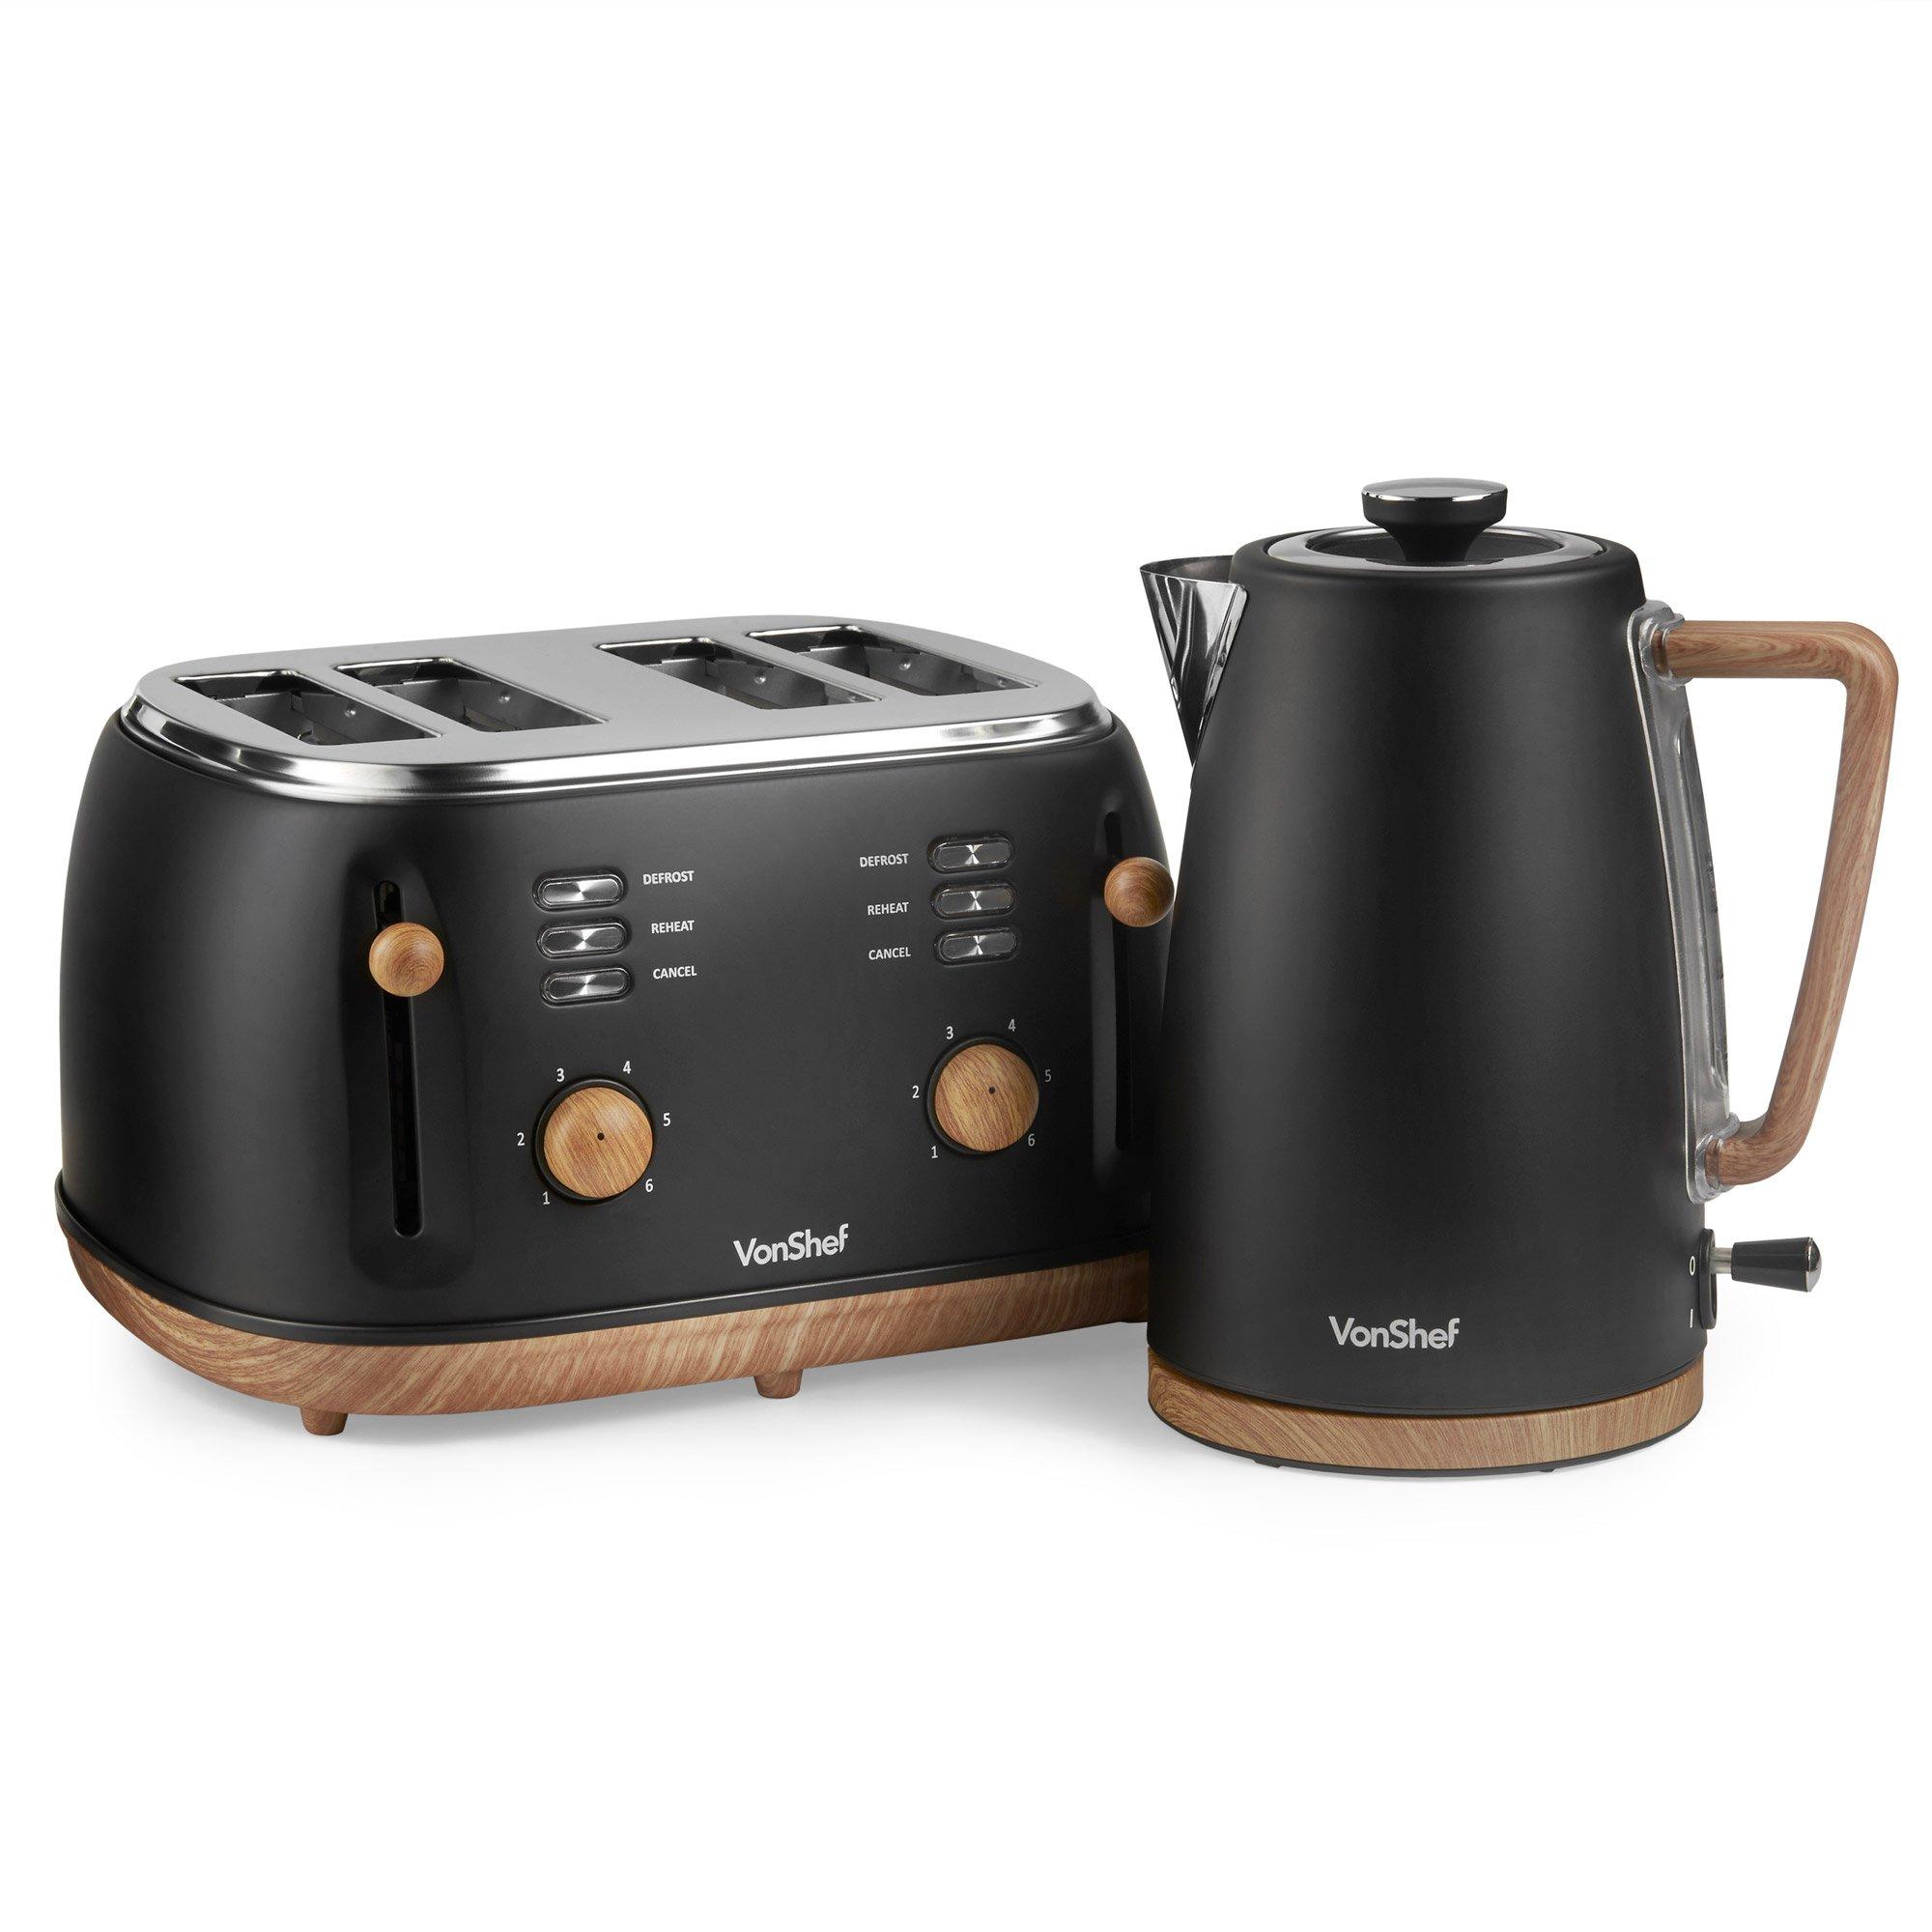 Fika Nordic Rapid Boil Kettle And Four Slice Wide Slot Toaster Set